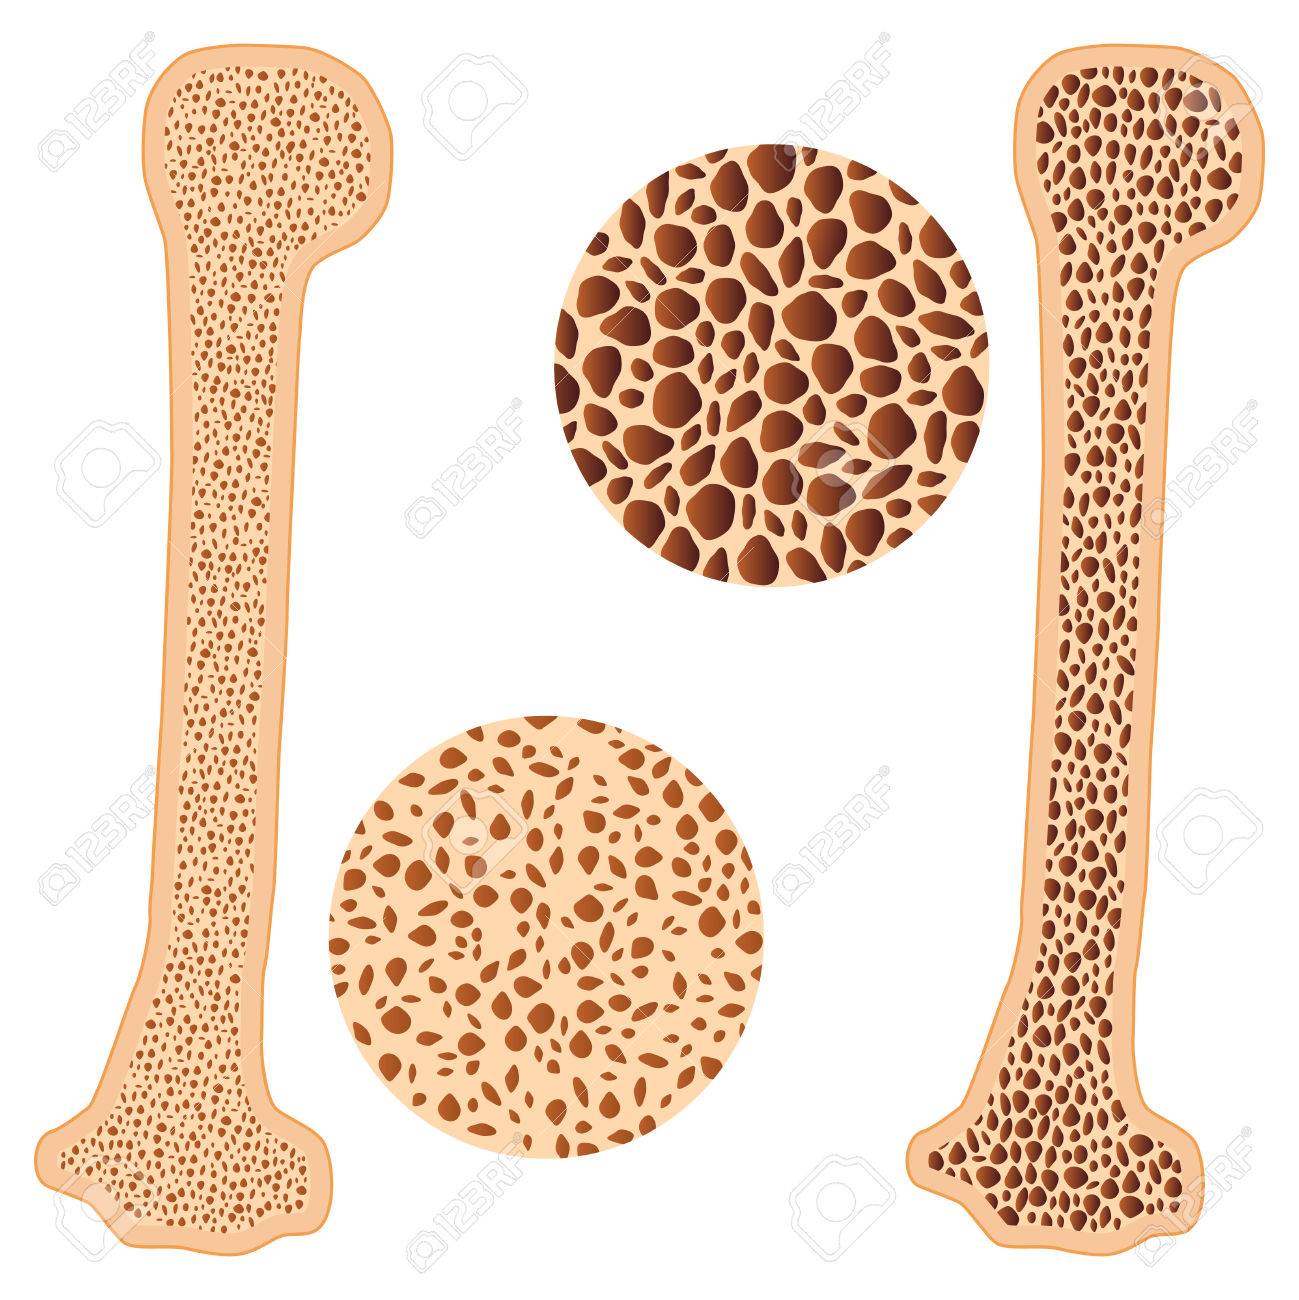 Illustration Of Osteoporosis Bone And Healthy On The White